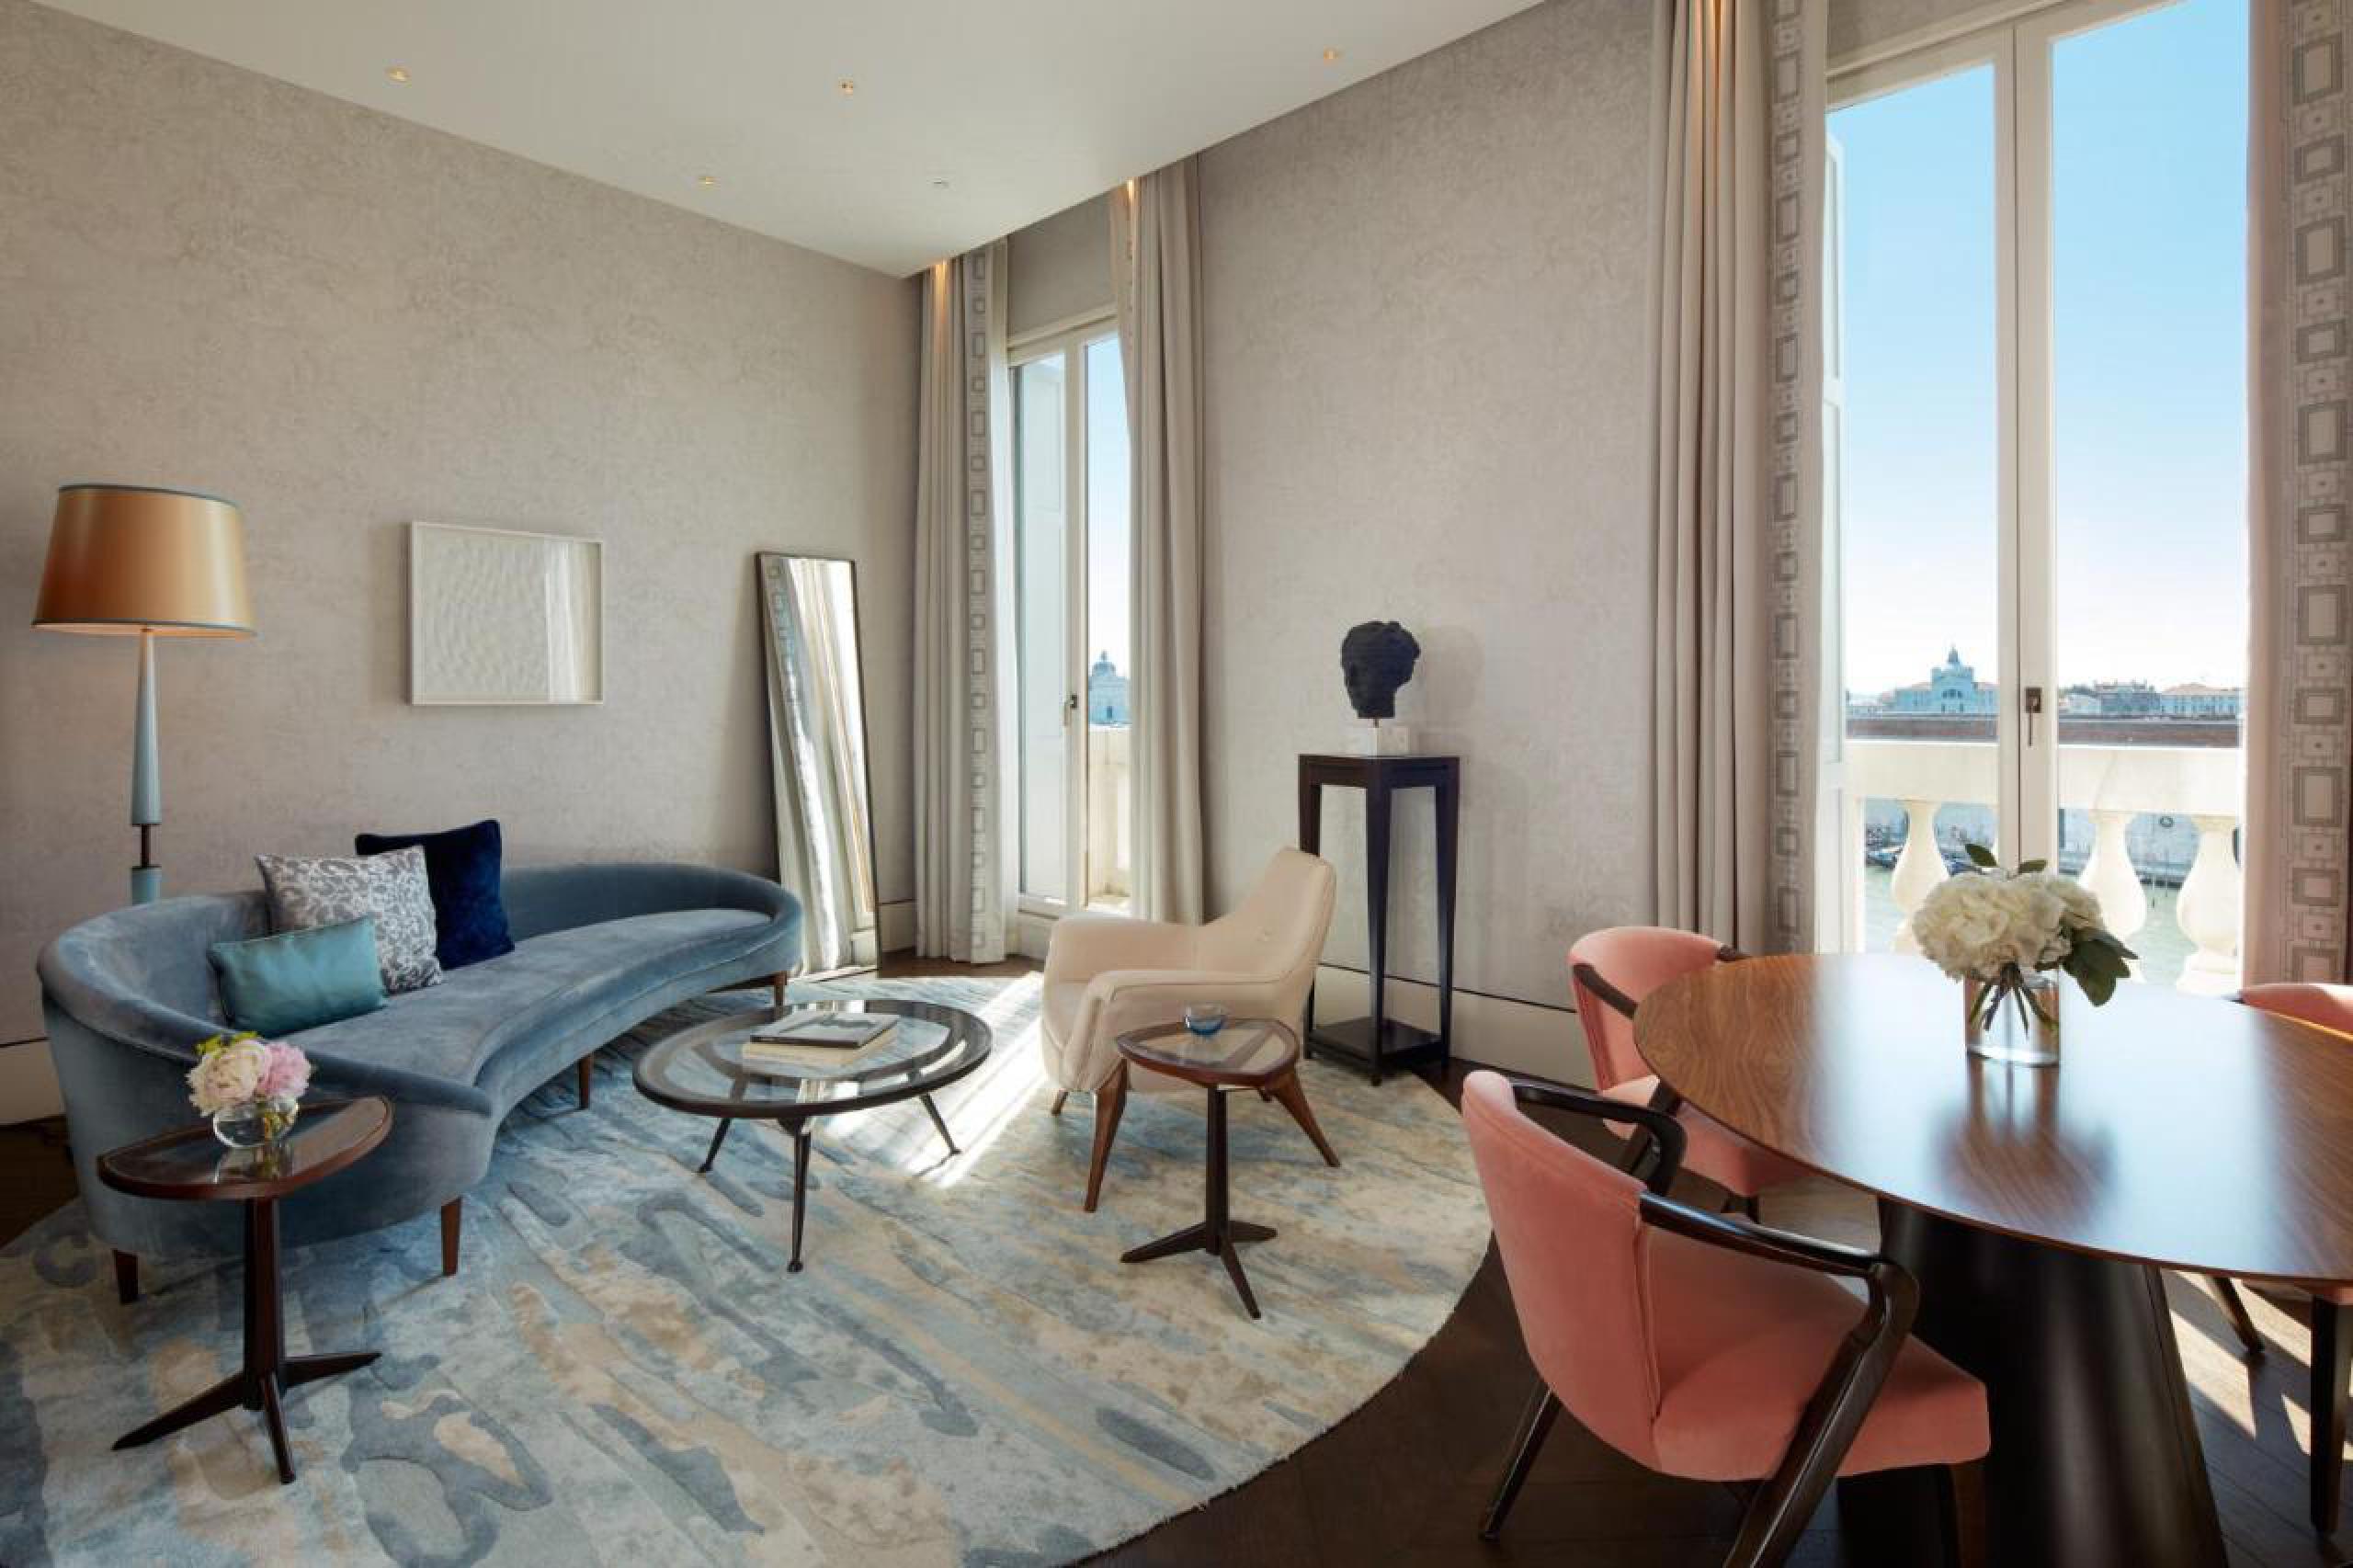 Hotel the St. Regis – Venezia. Permanent set-up of works inside rooms and suites.